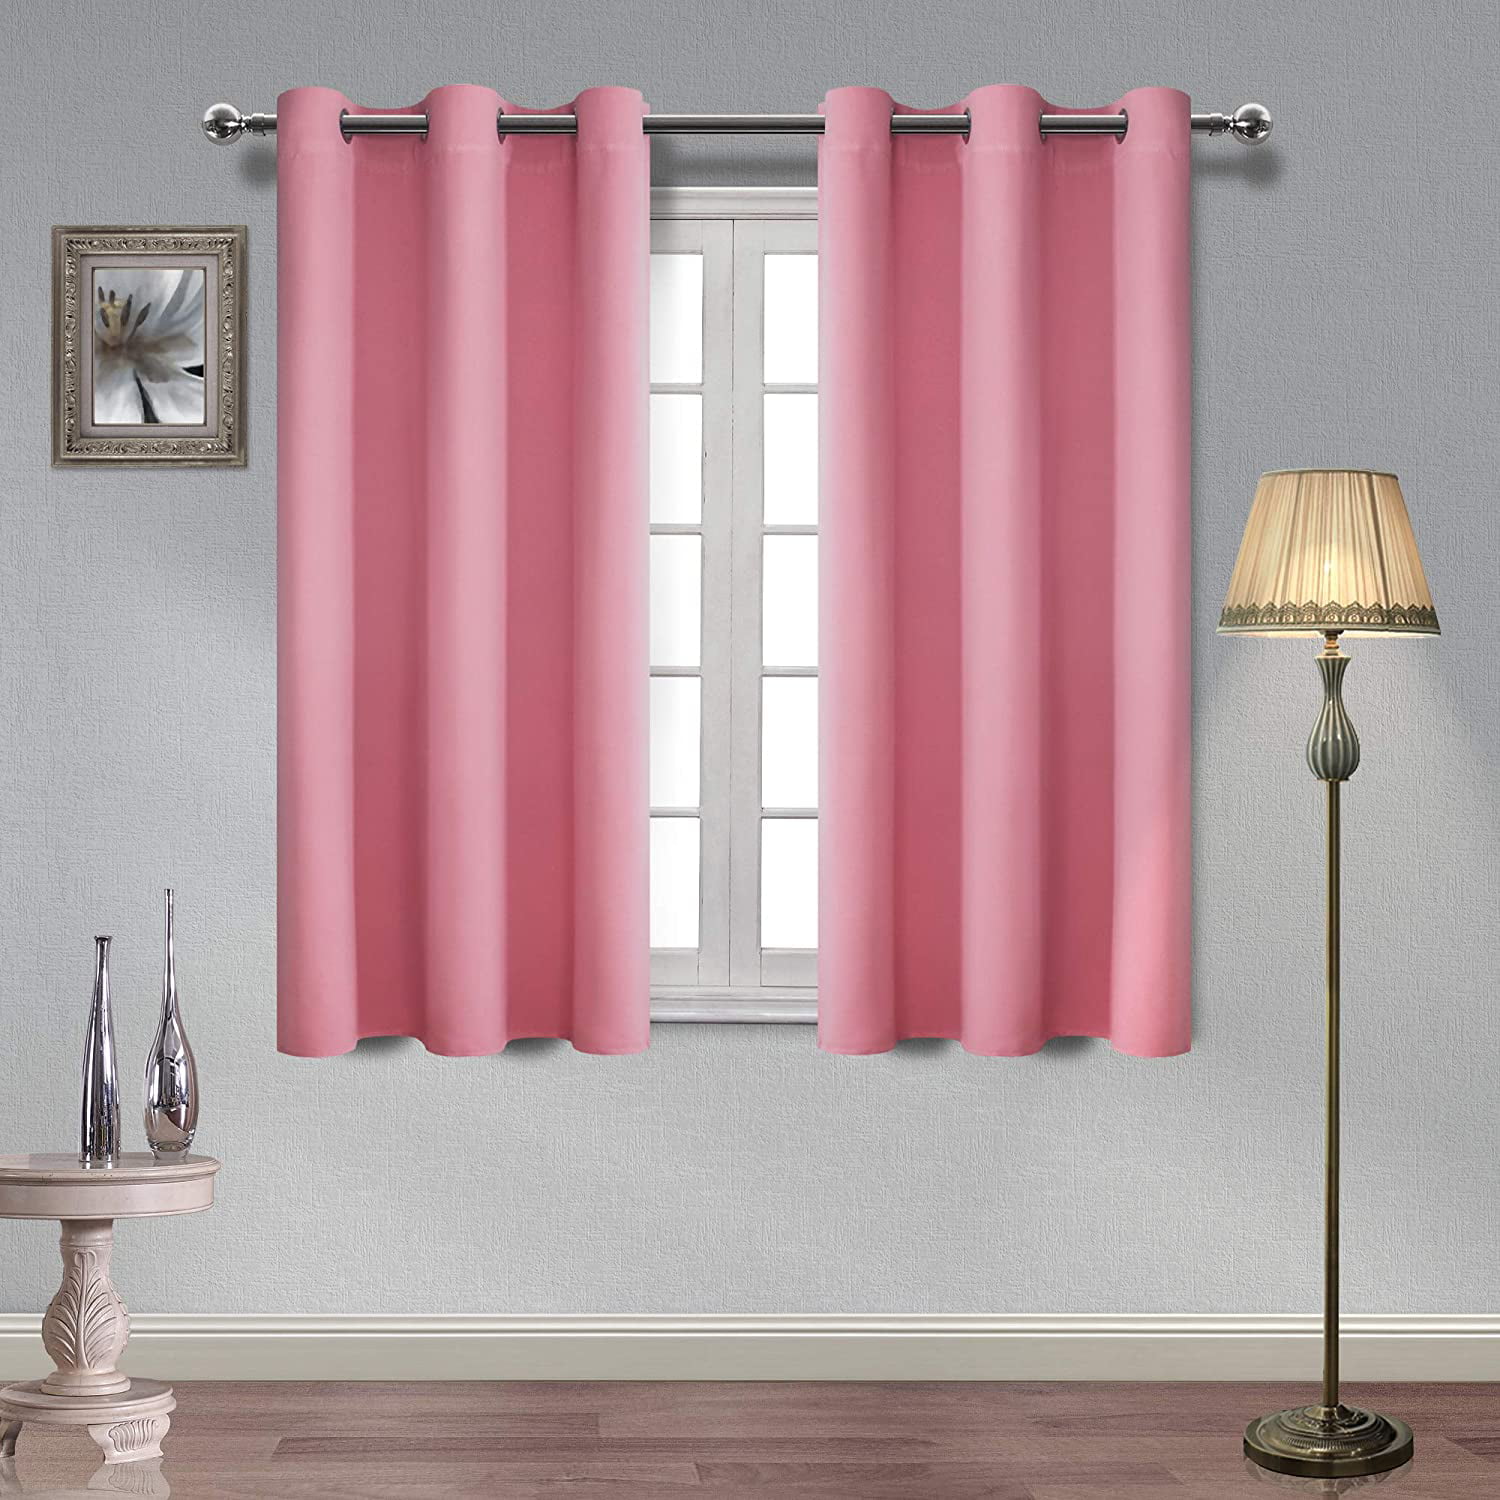 2 Drape Panels Hiasan Grey Blackout Curtains for Bedroom Grommet Thermal Insulated and Light Reducing Room Darkening Window Curtains 42 x 45 Inches Length